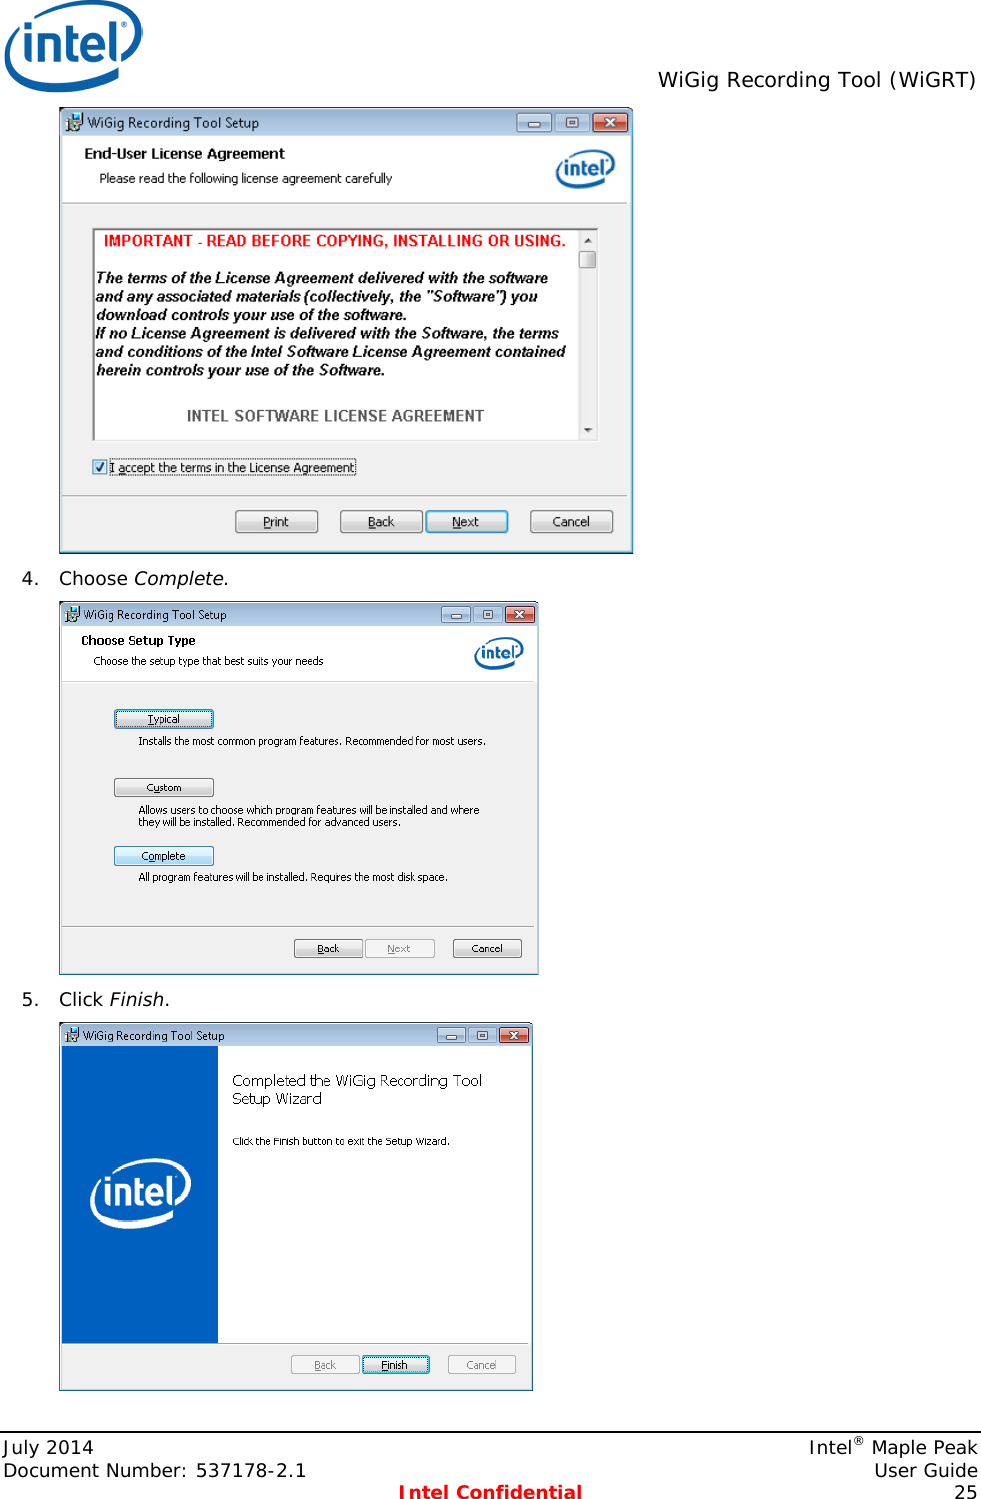  WiGig Recording Tool (WiGRT)   4. Choose Complete.  5. Click Finish.  July 2014    Intel® Maple Peak Document Number: 537178-2.1    User Guide  Intel Confidential 25 